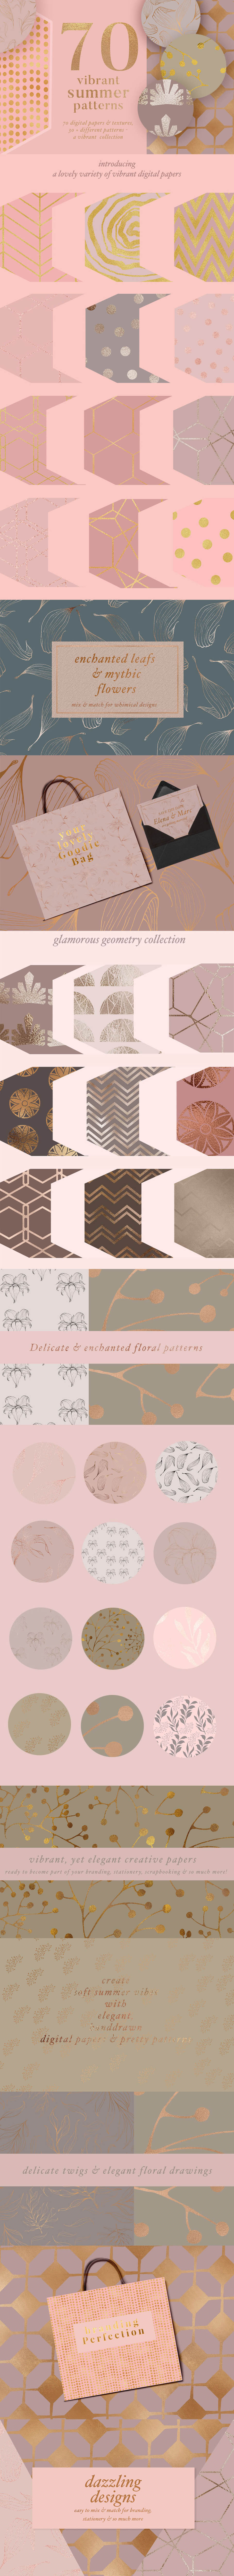 Textures & Patterns Collection